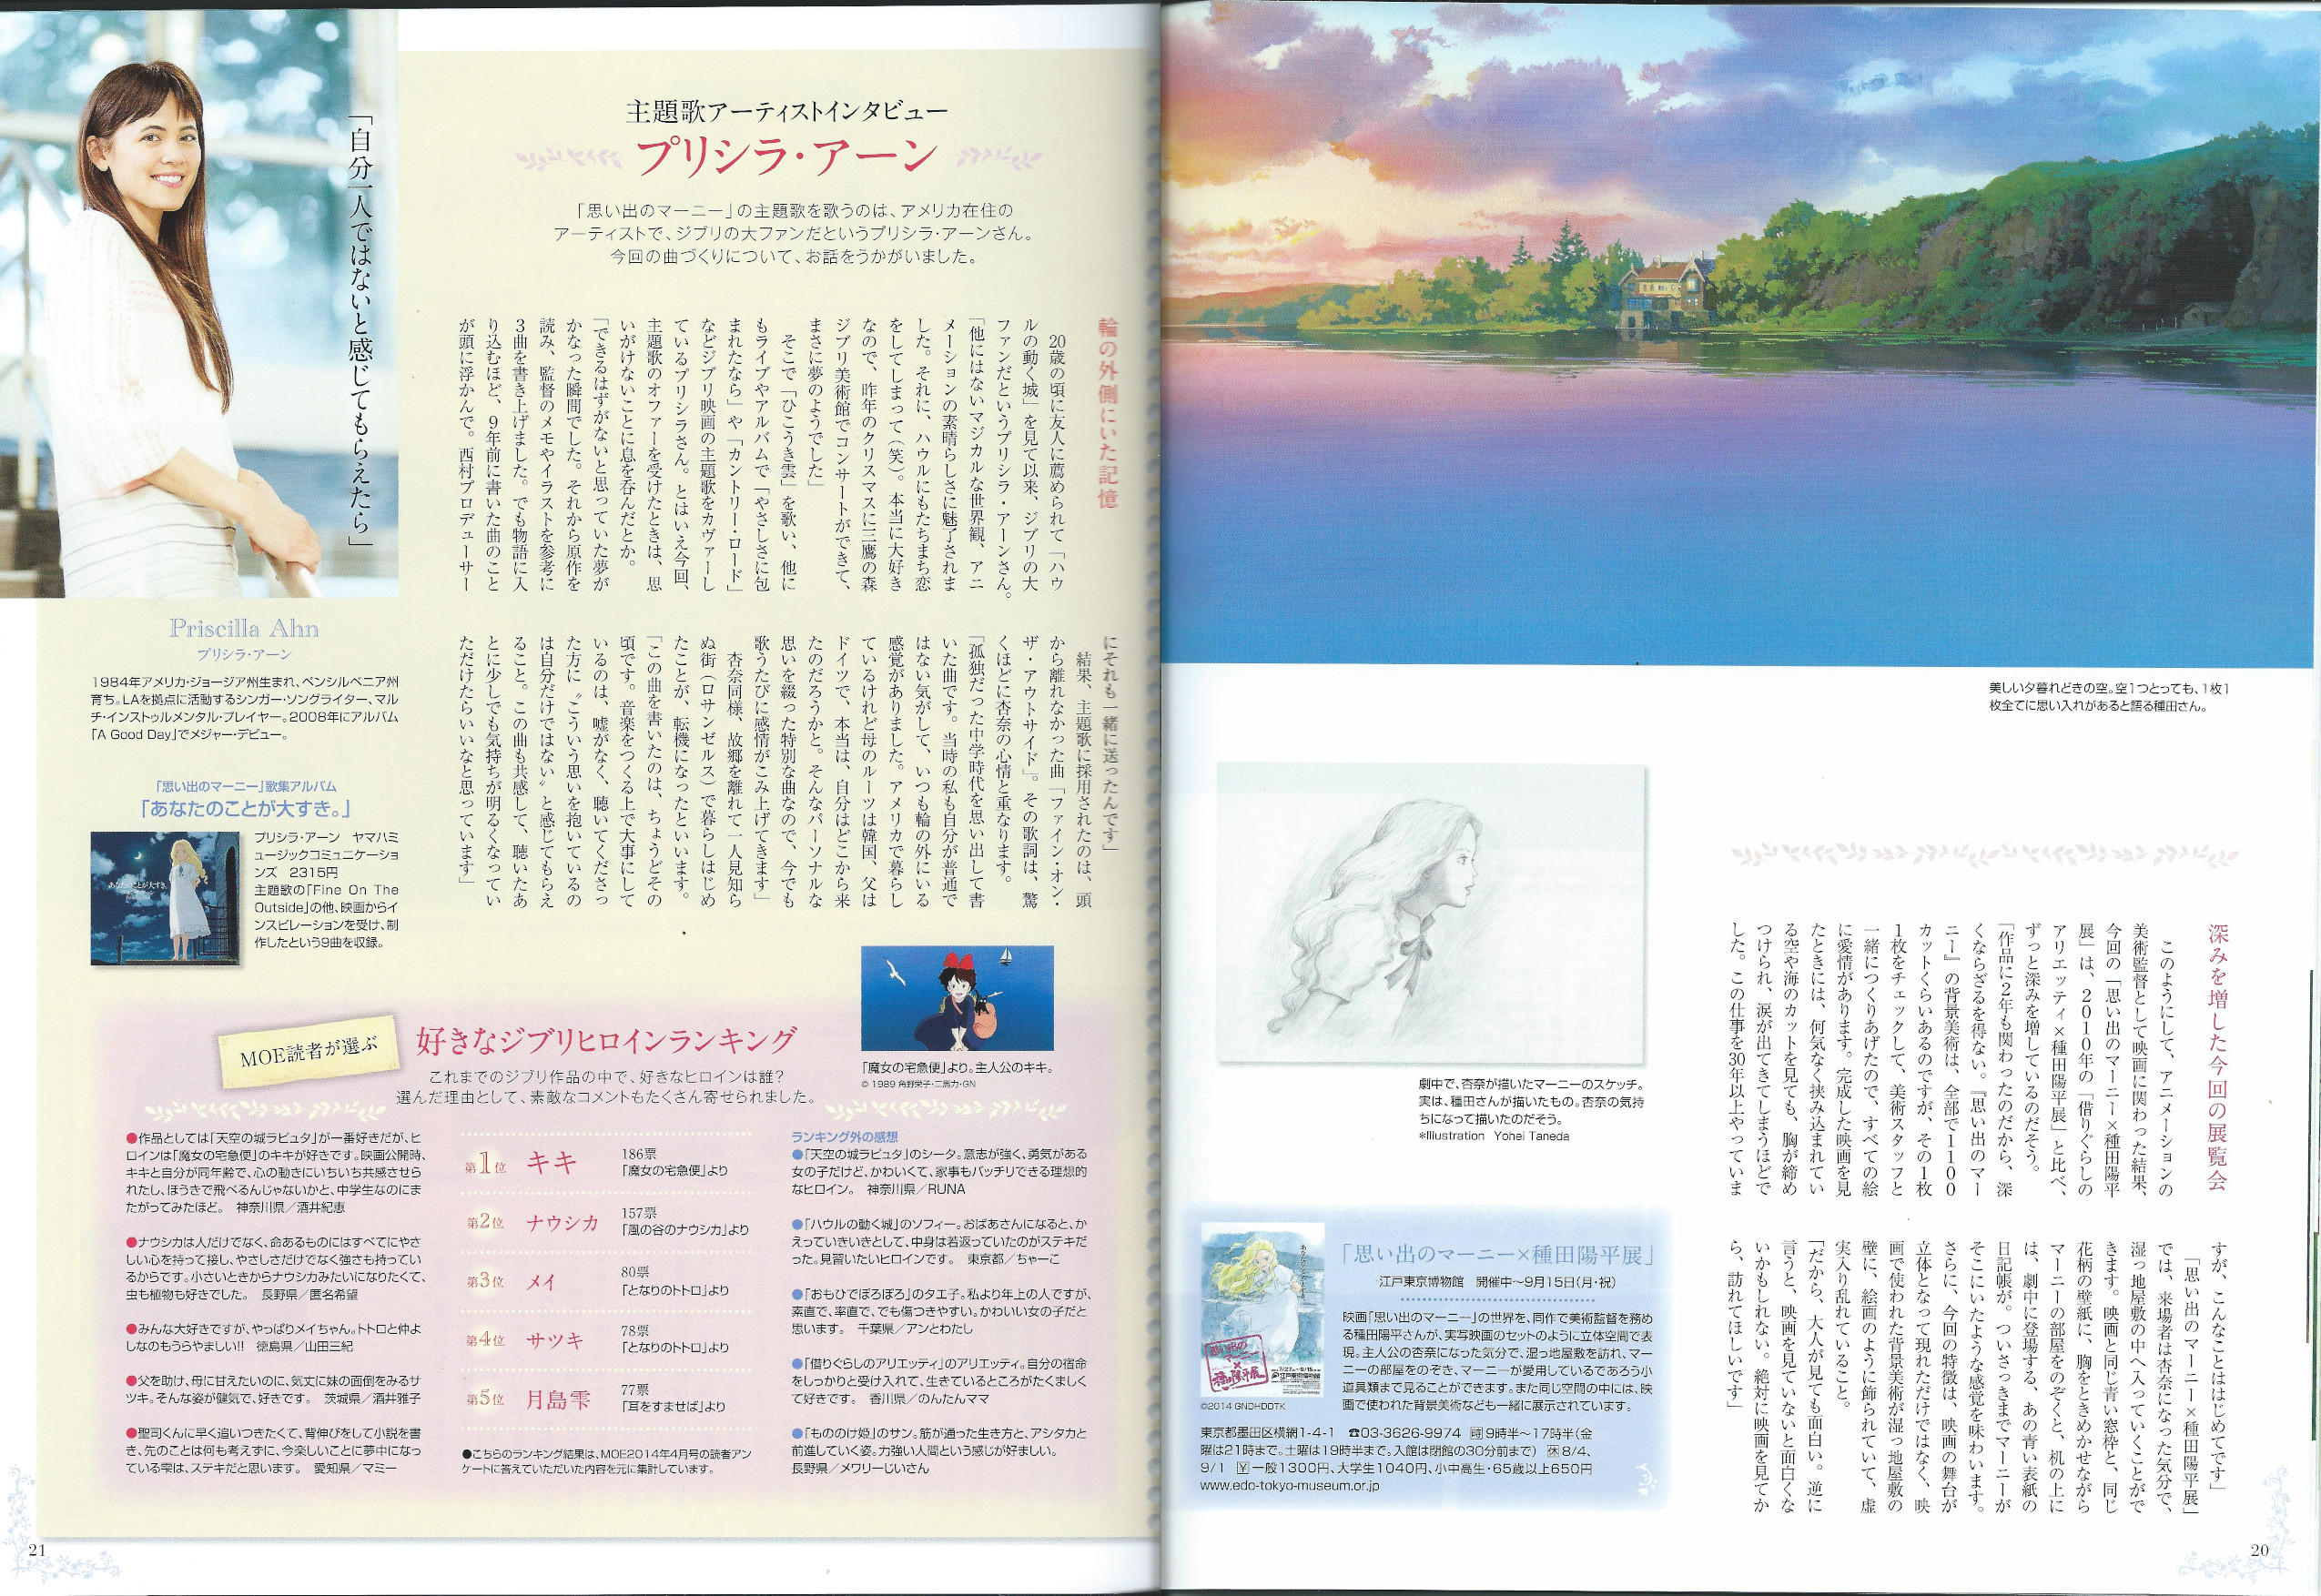 Pages 20 and 21 of the magazine